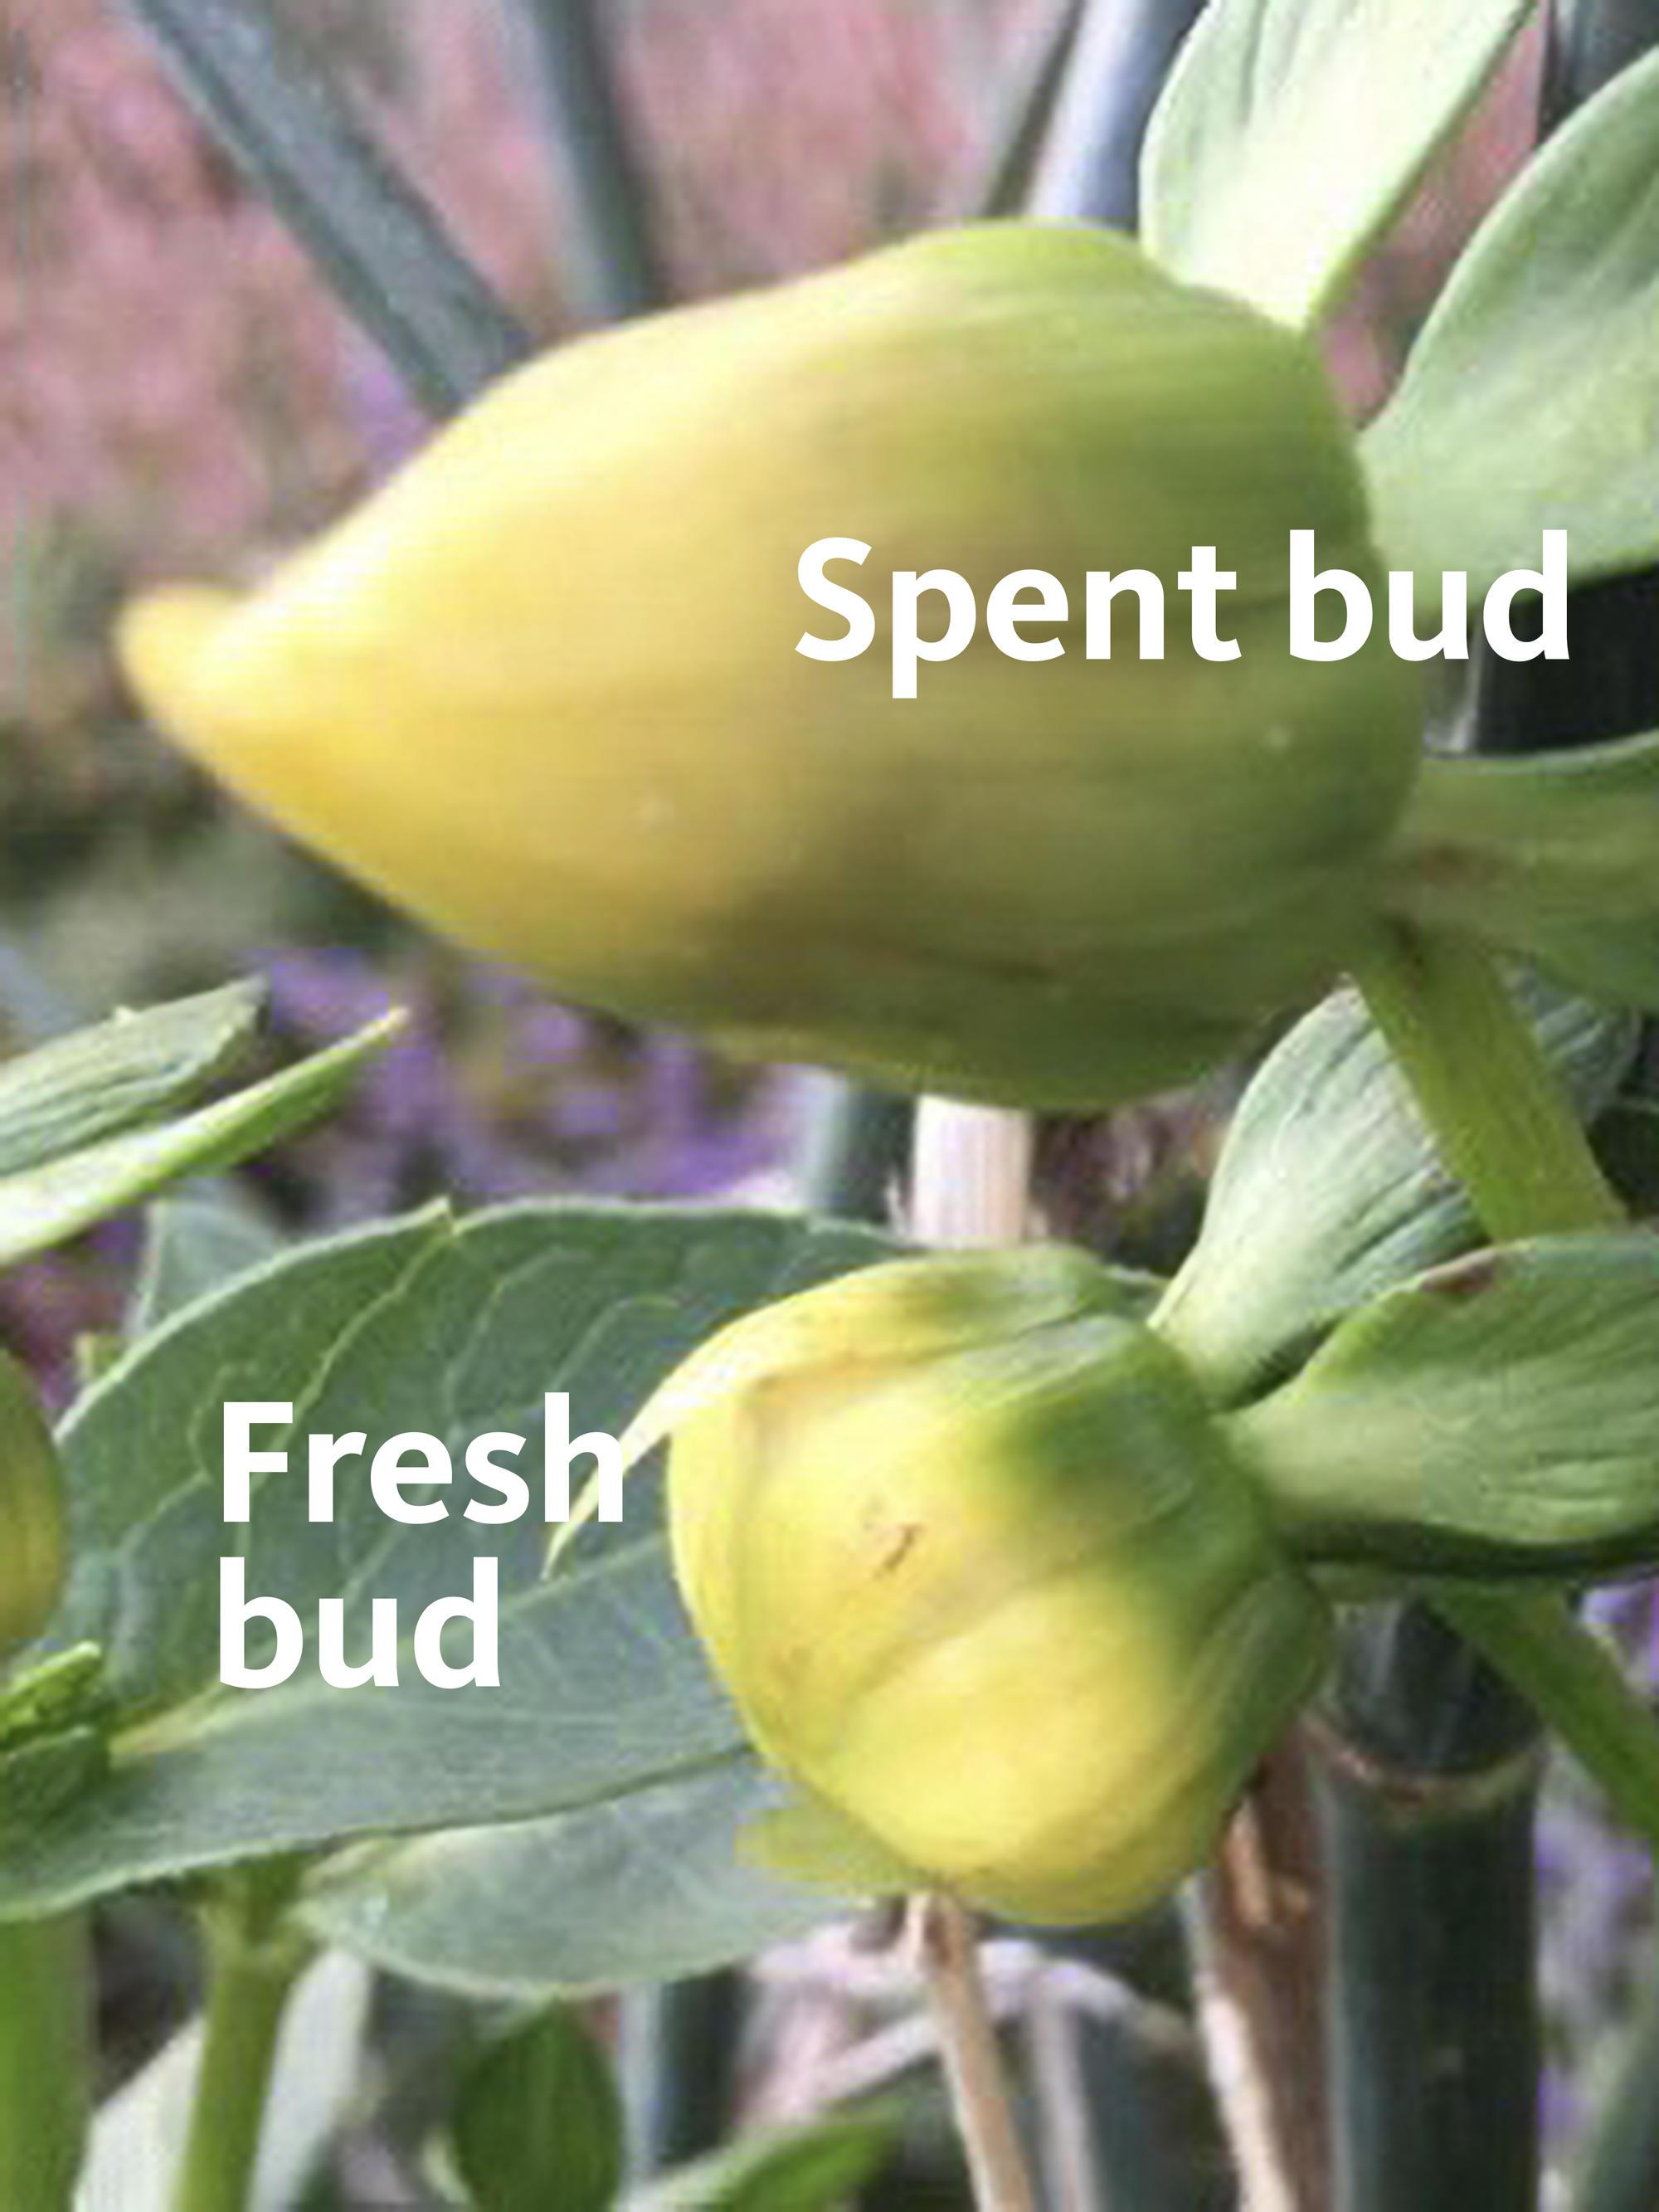 conical spent bud at top, round fresh bud below